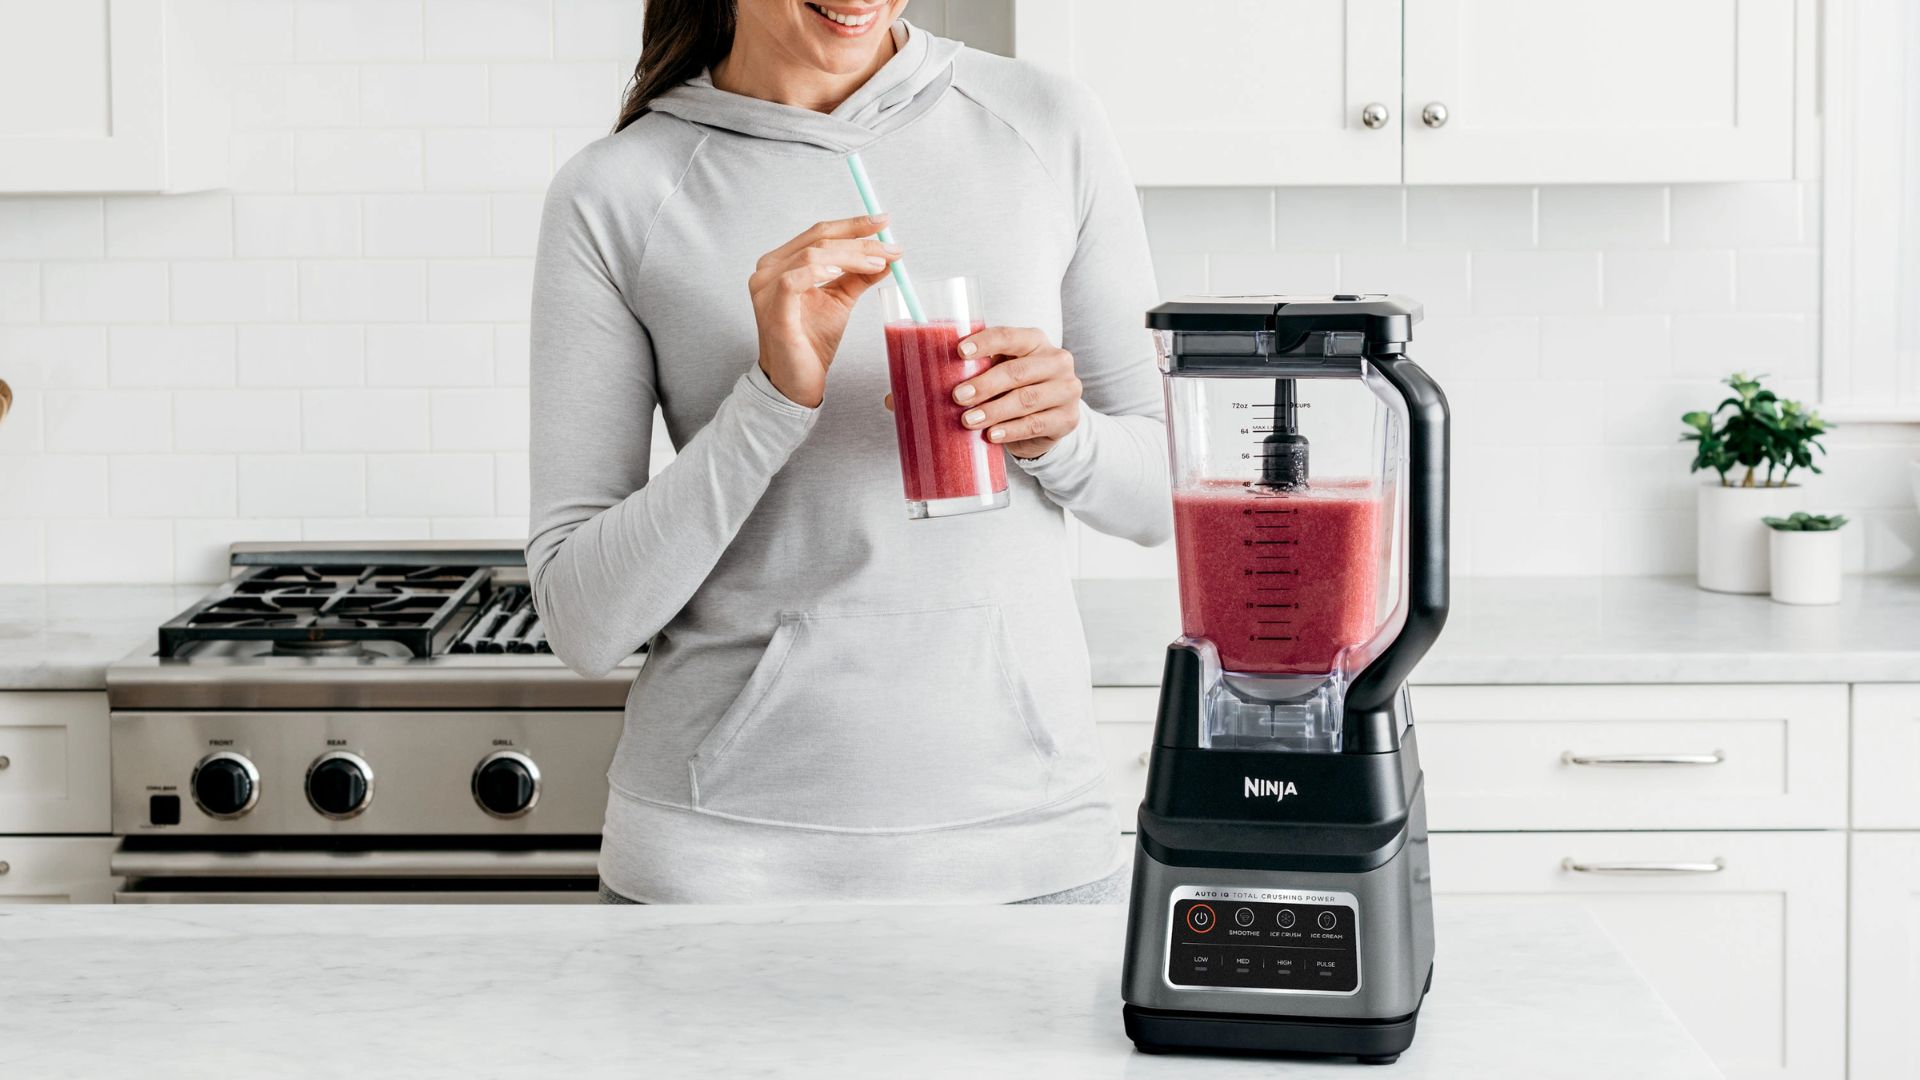 A freshly made smoothie in the Ninja Professional Plus